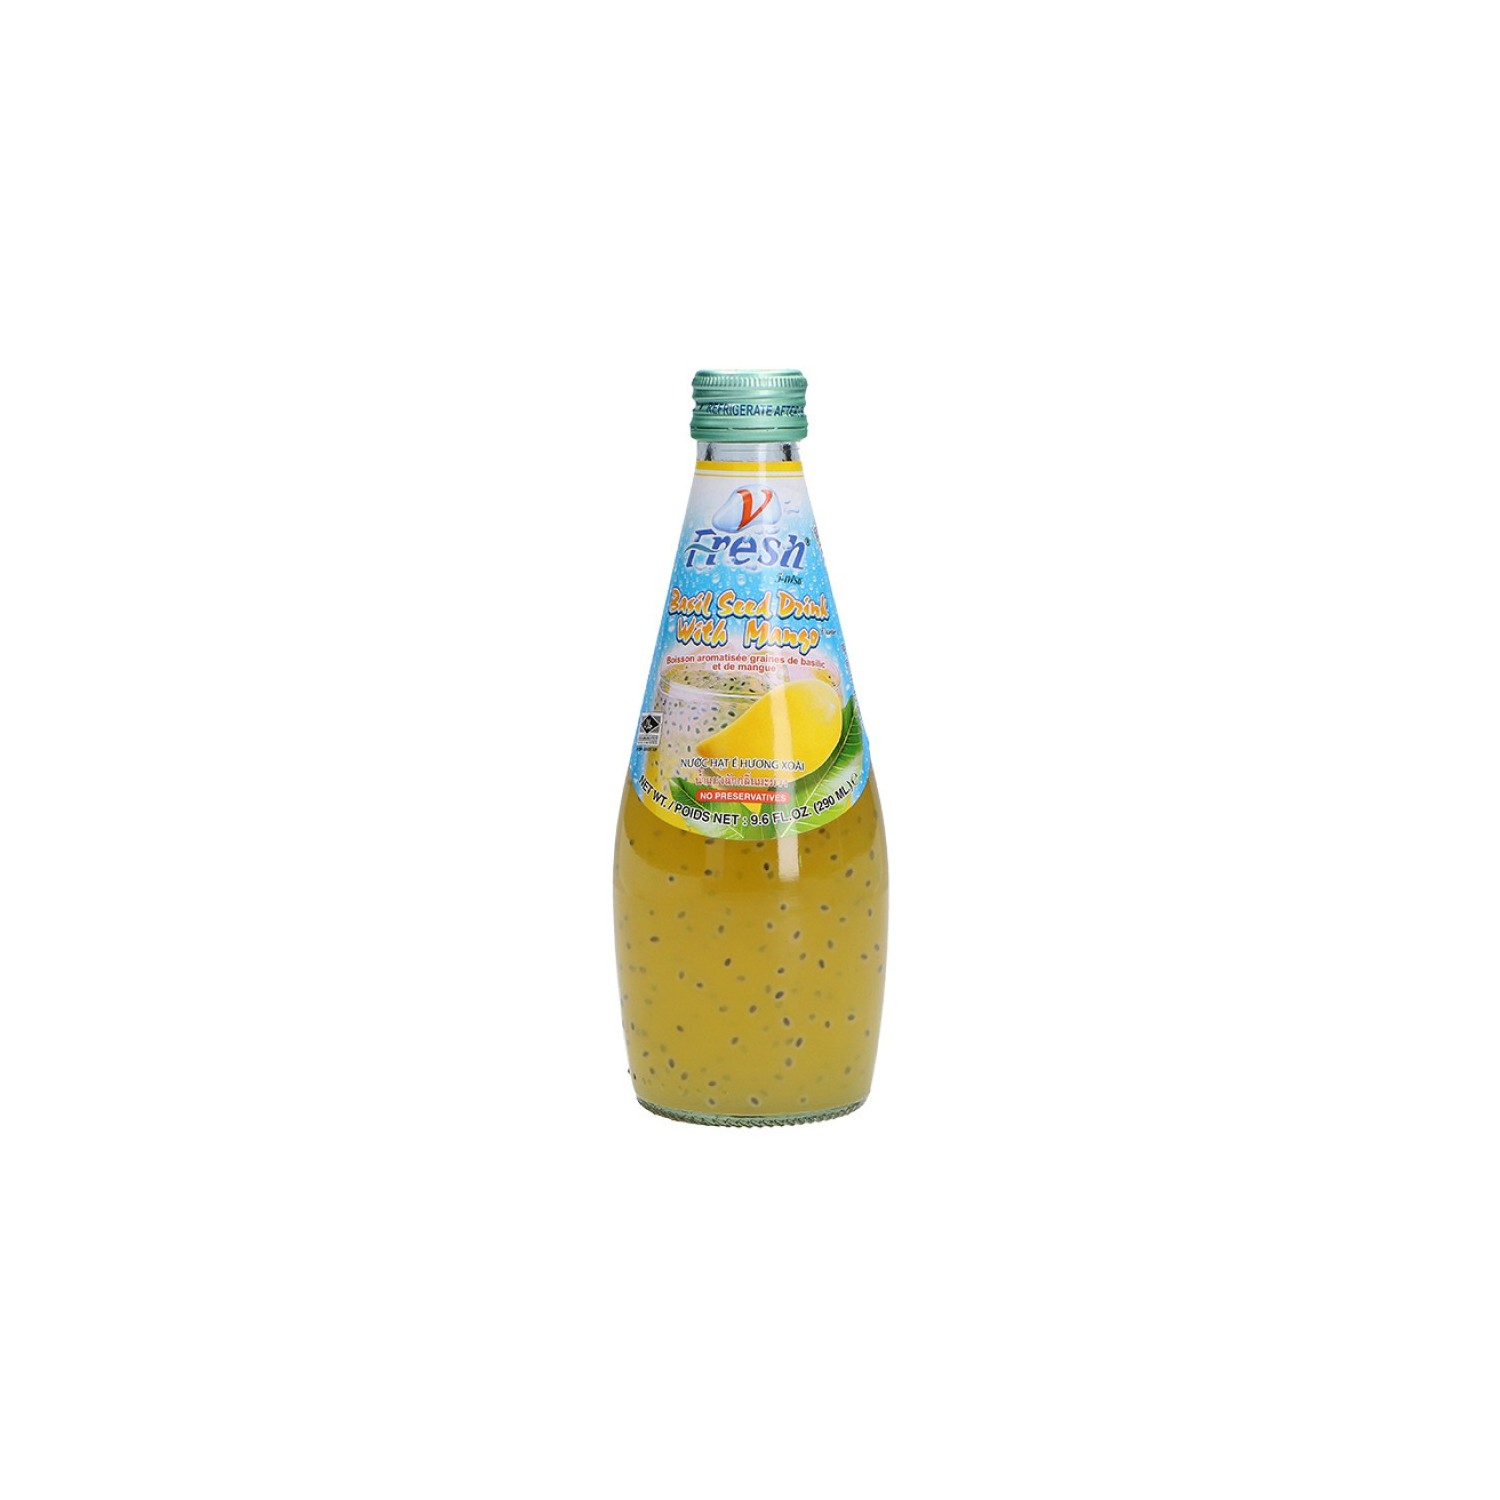 Basil and Seed Drink With Mango - 8853095006004